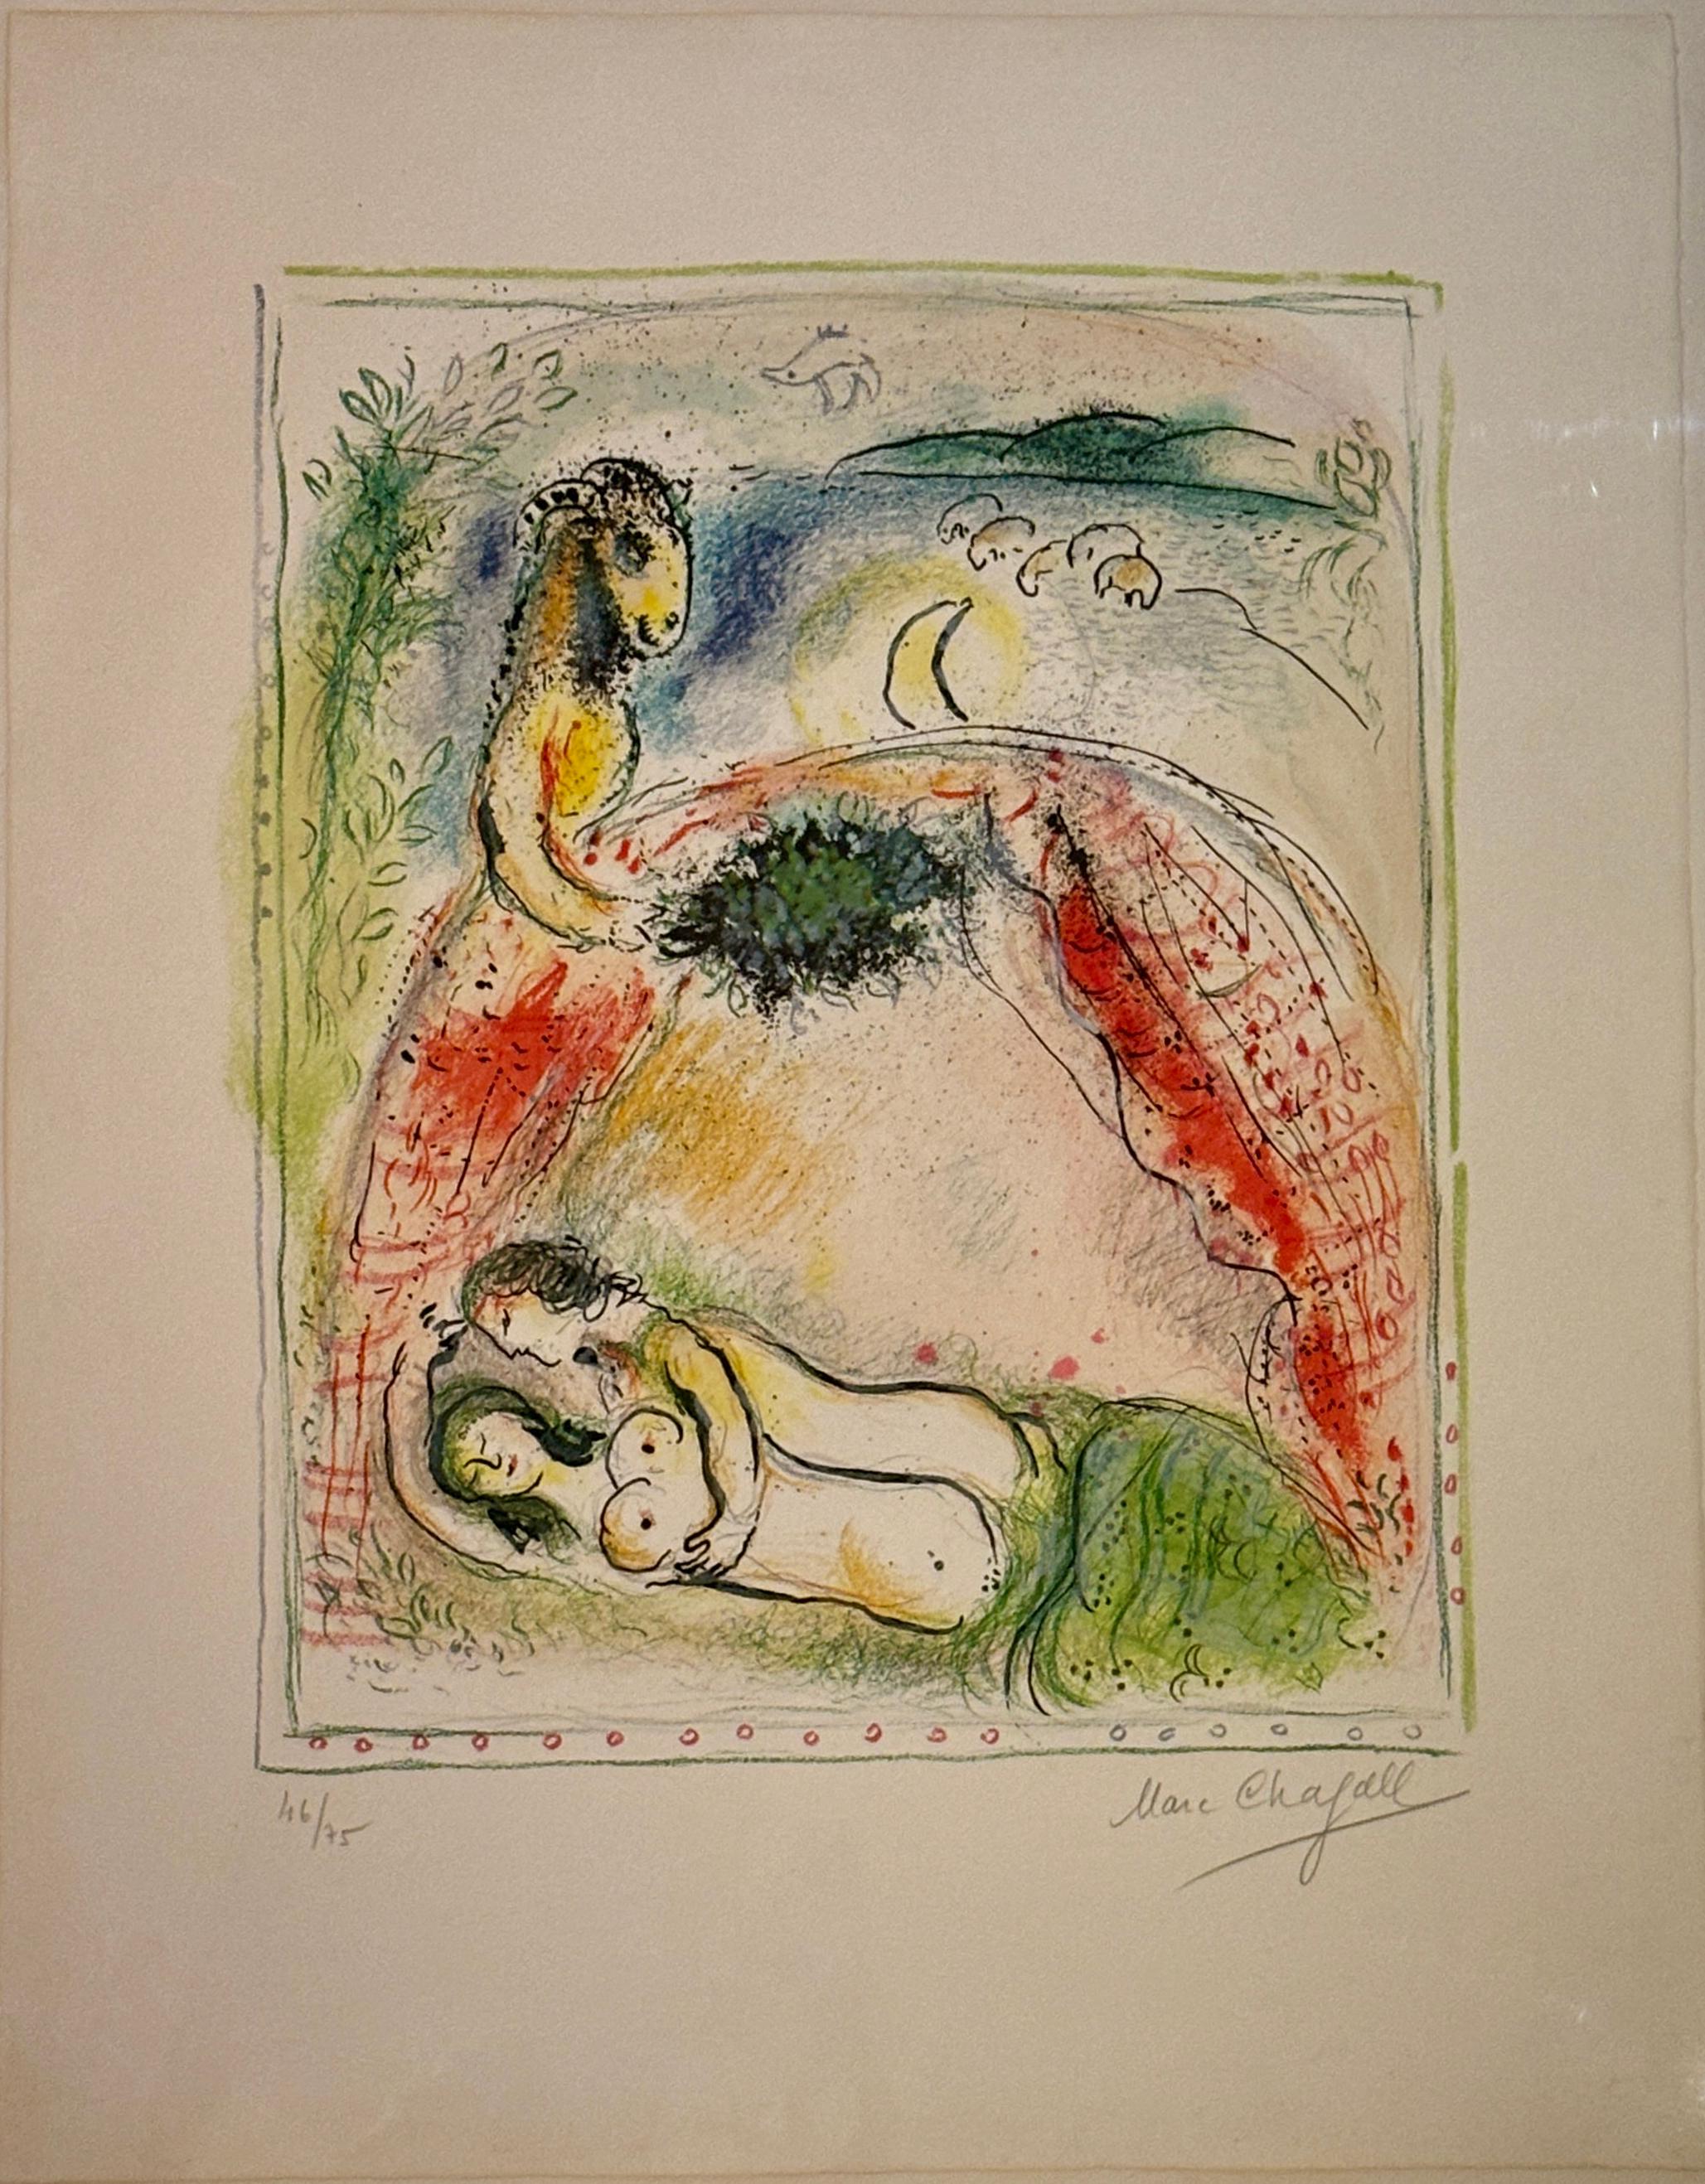 How many paintings did Marc Chagall paint?